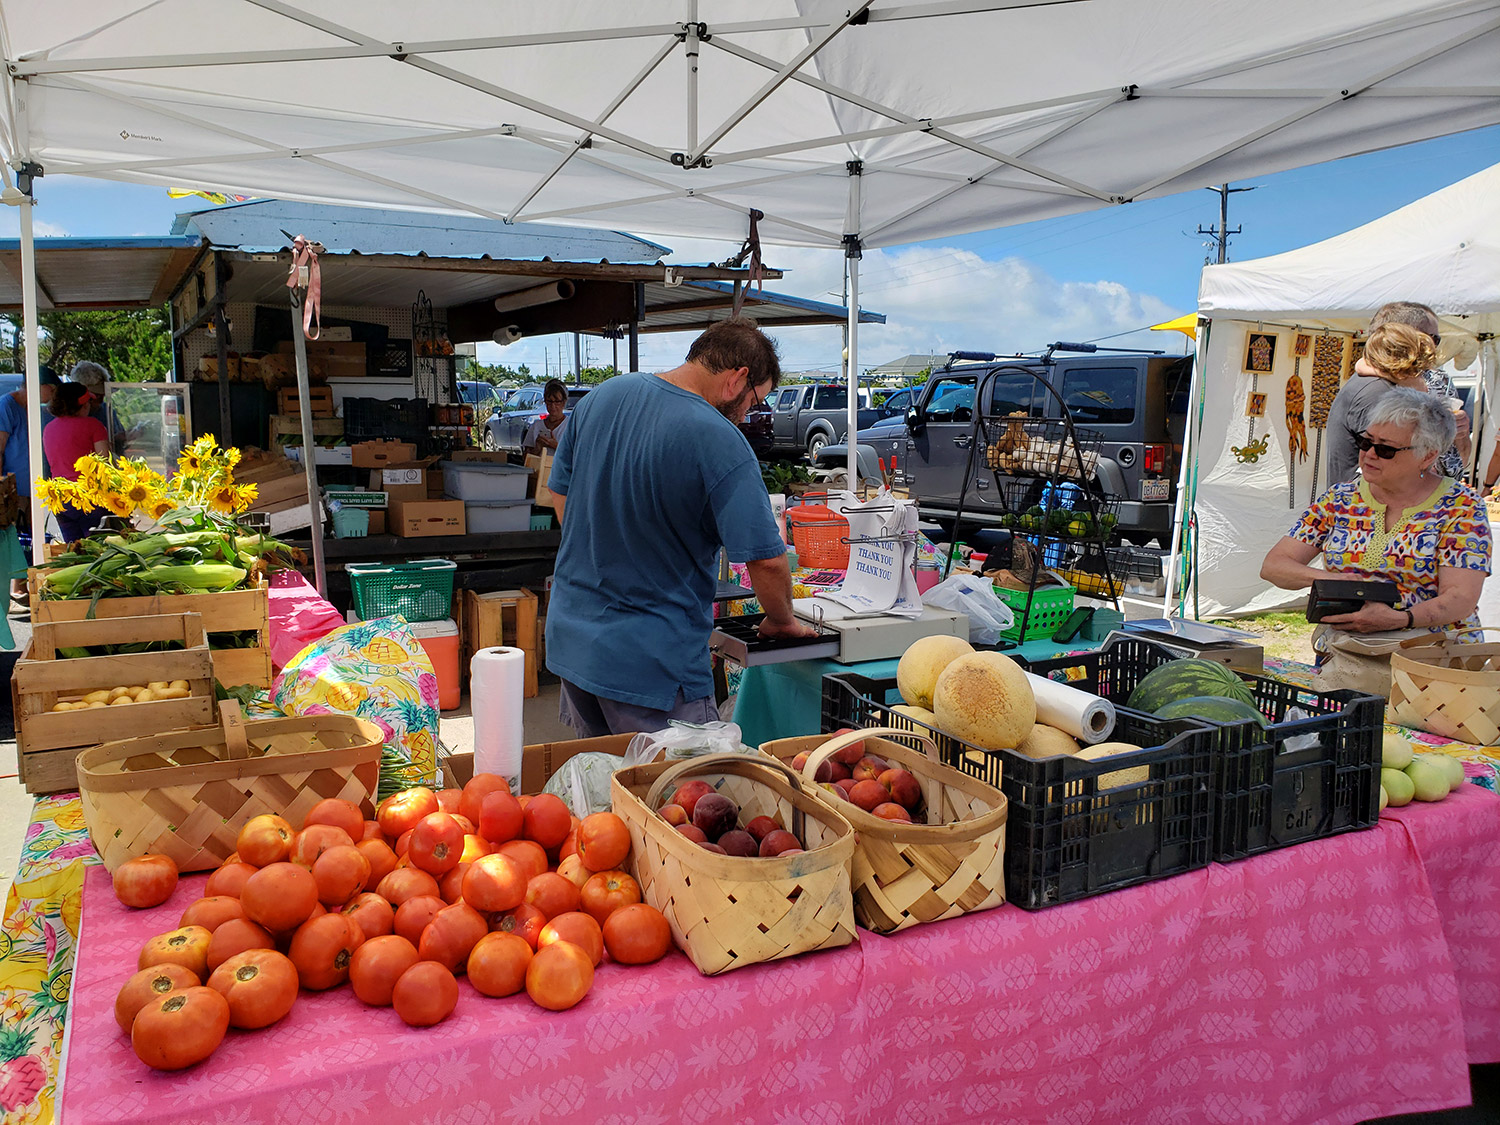 Avon Farmers Market is returning for 2023 with a new location